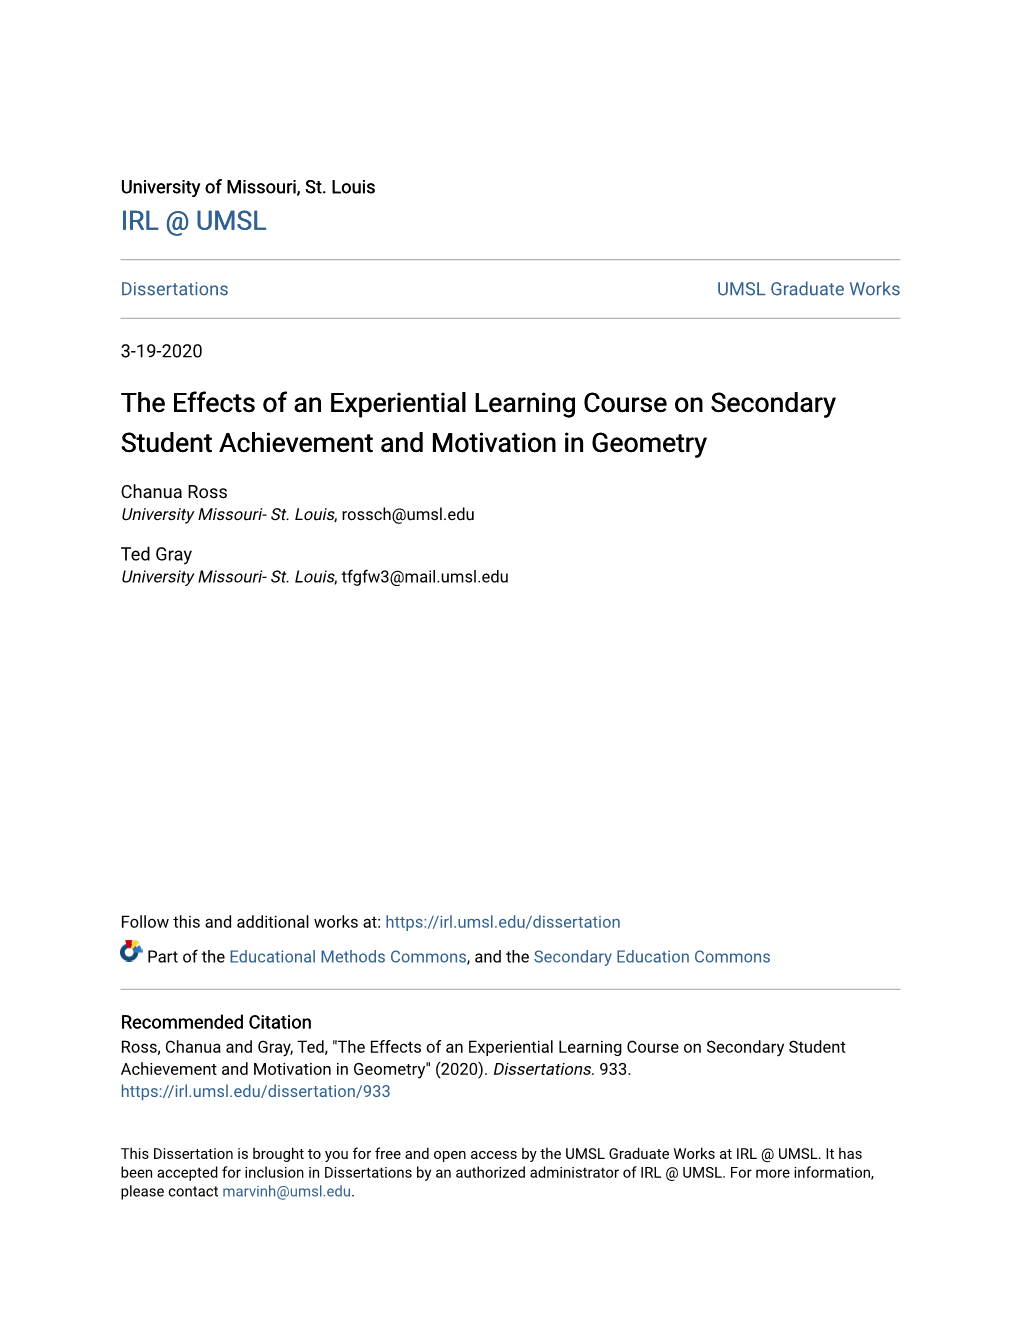 The Effects of an Experiential Learning Course on Secondary Student Achievement and Motivation in Geometry